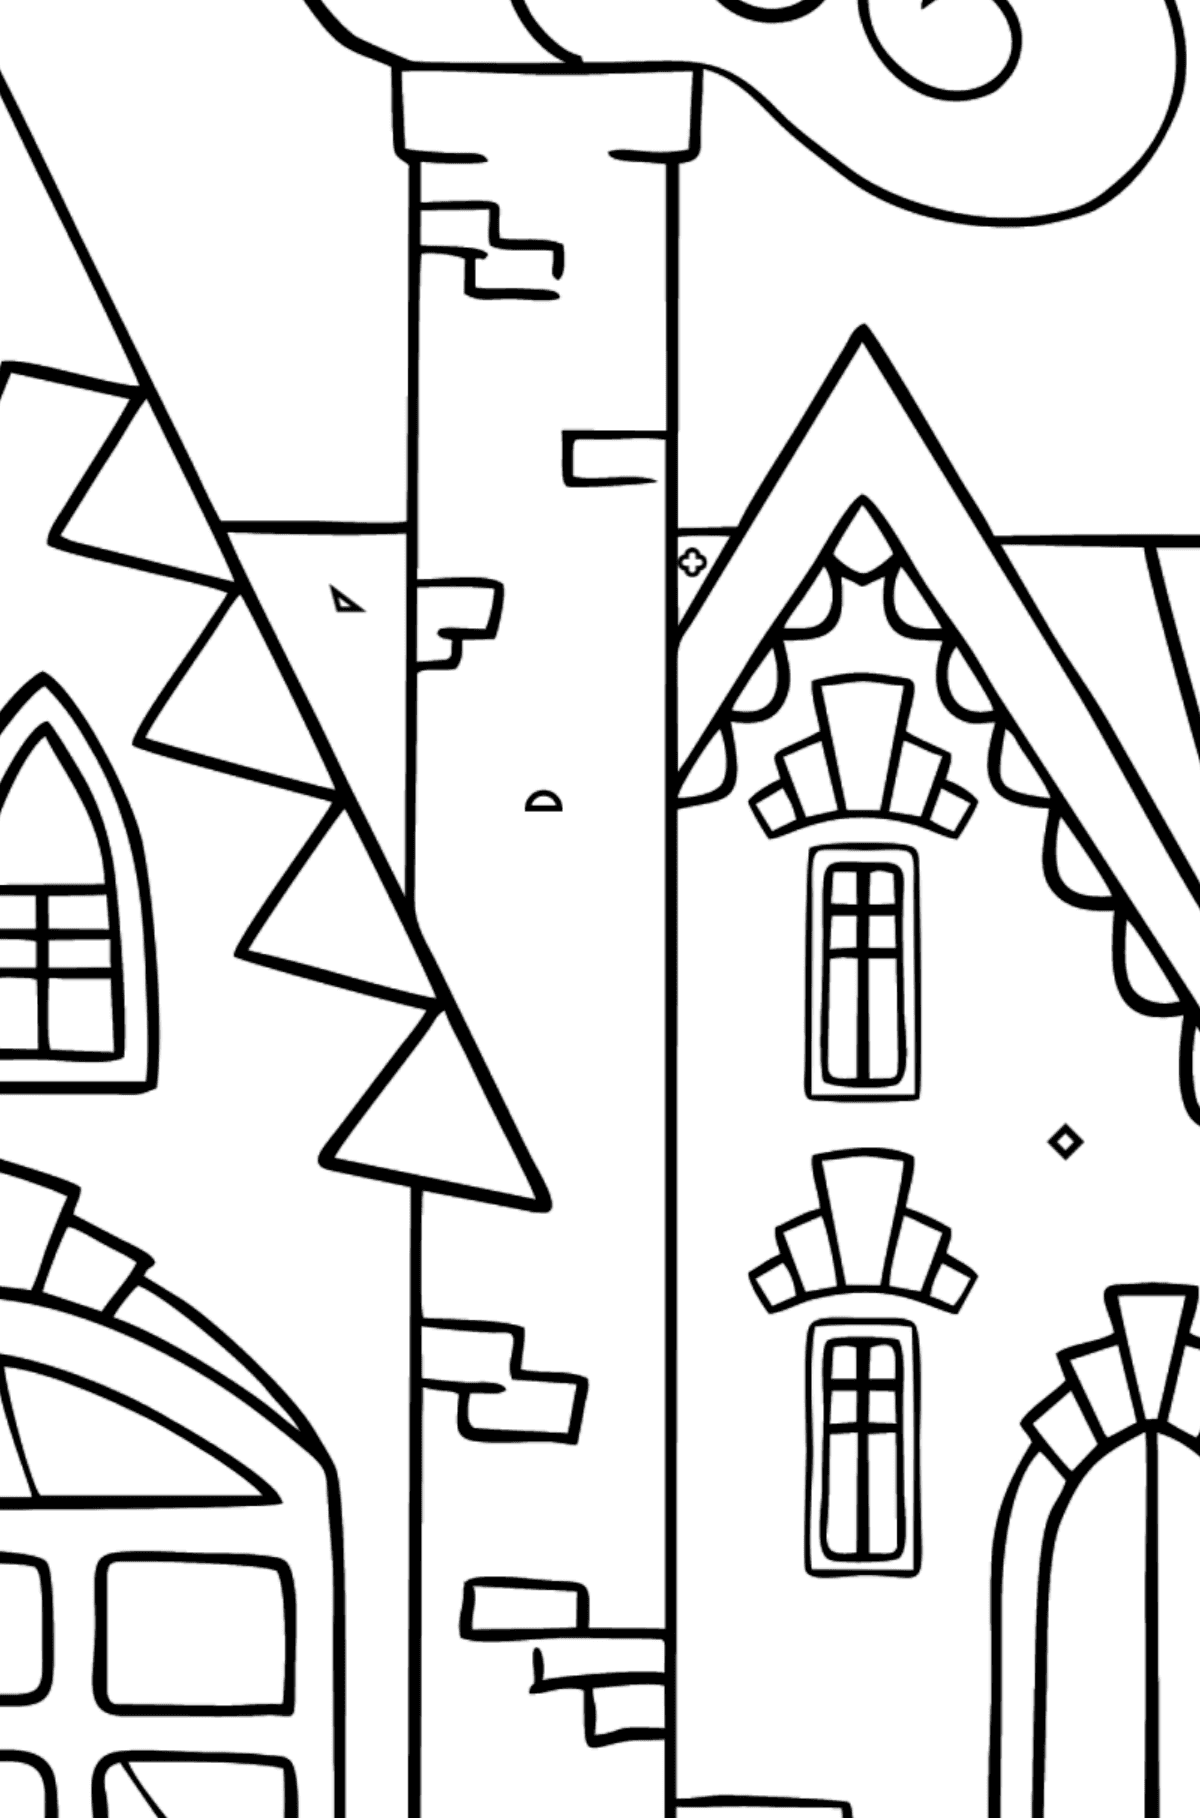 Simple Coloring Page - A Charming House - Coloring by Symbols and Geometric Shapes for Kids